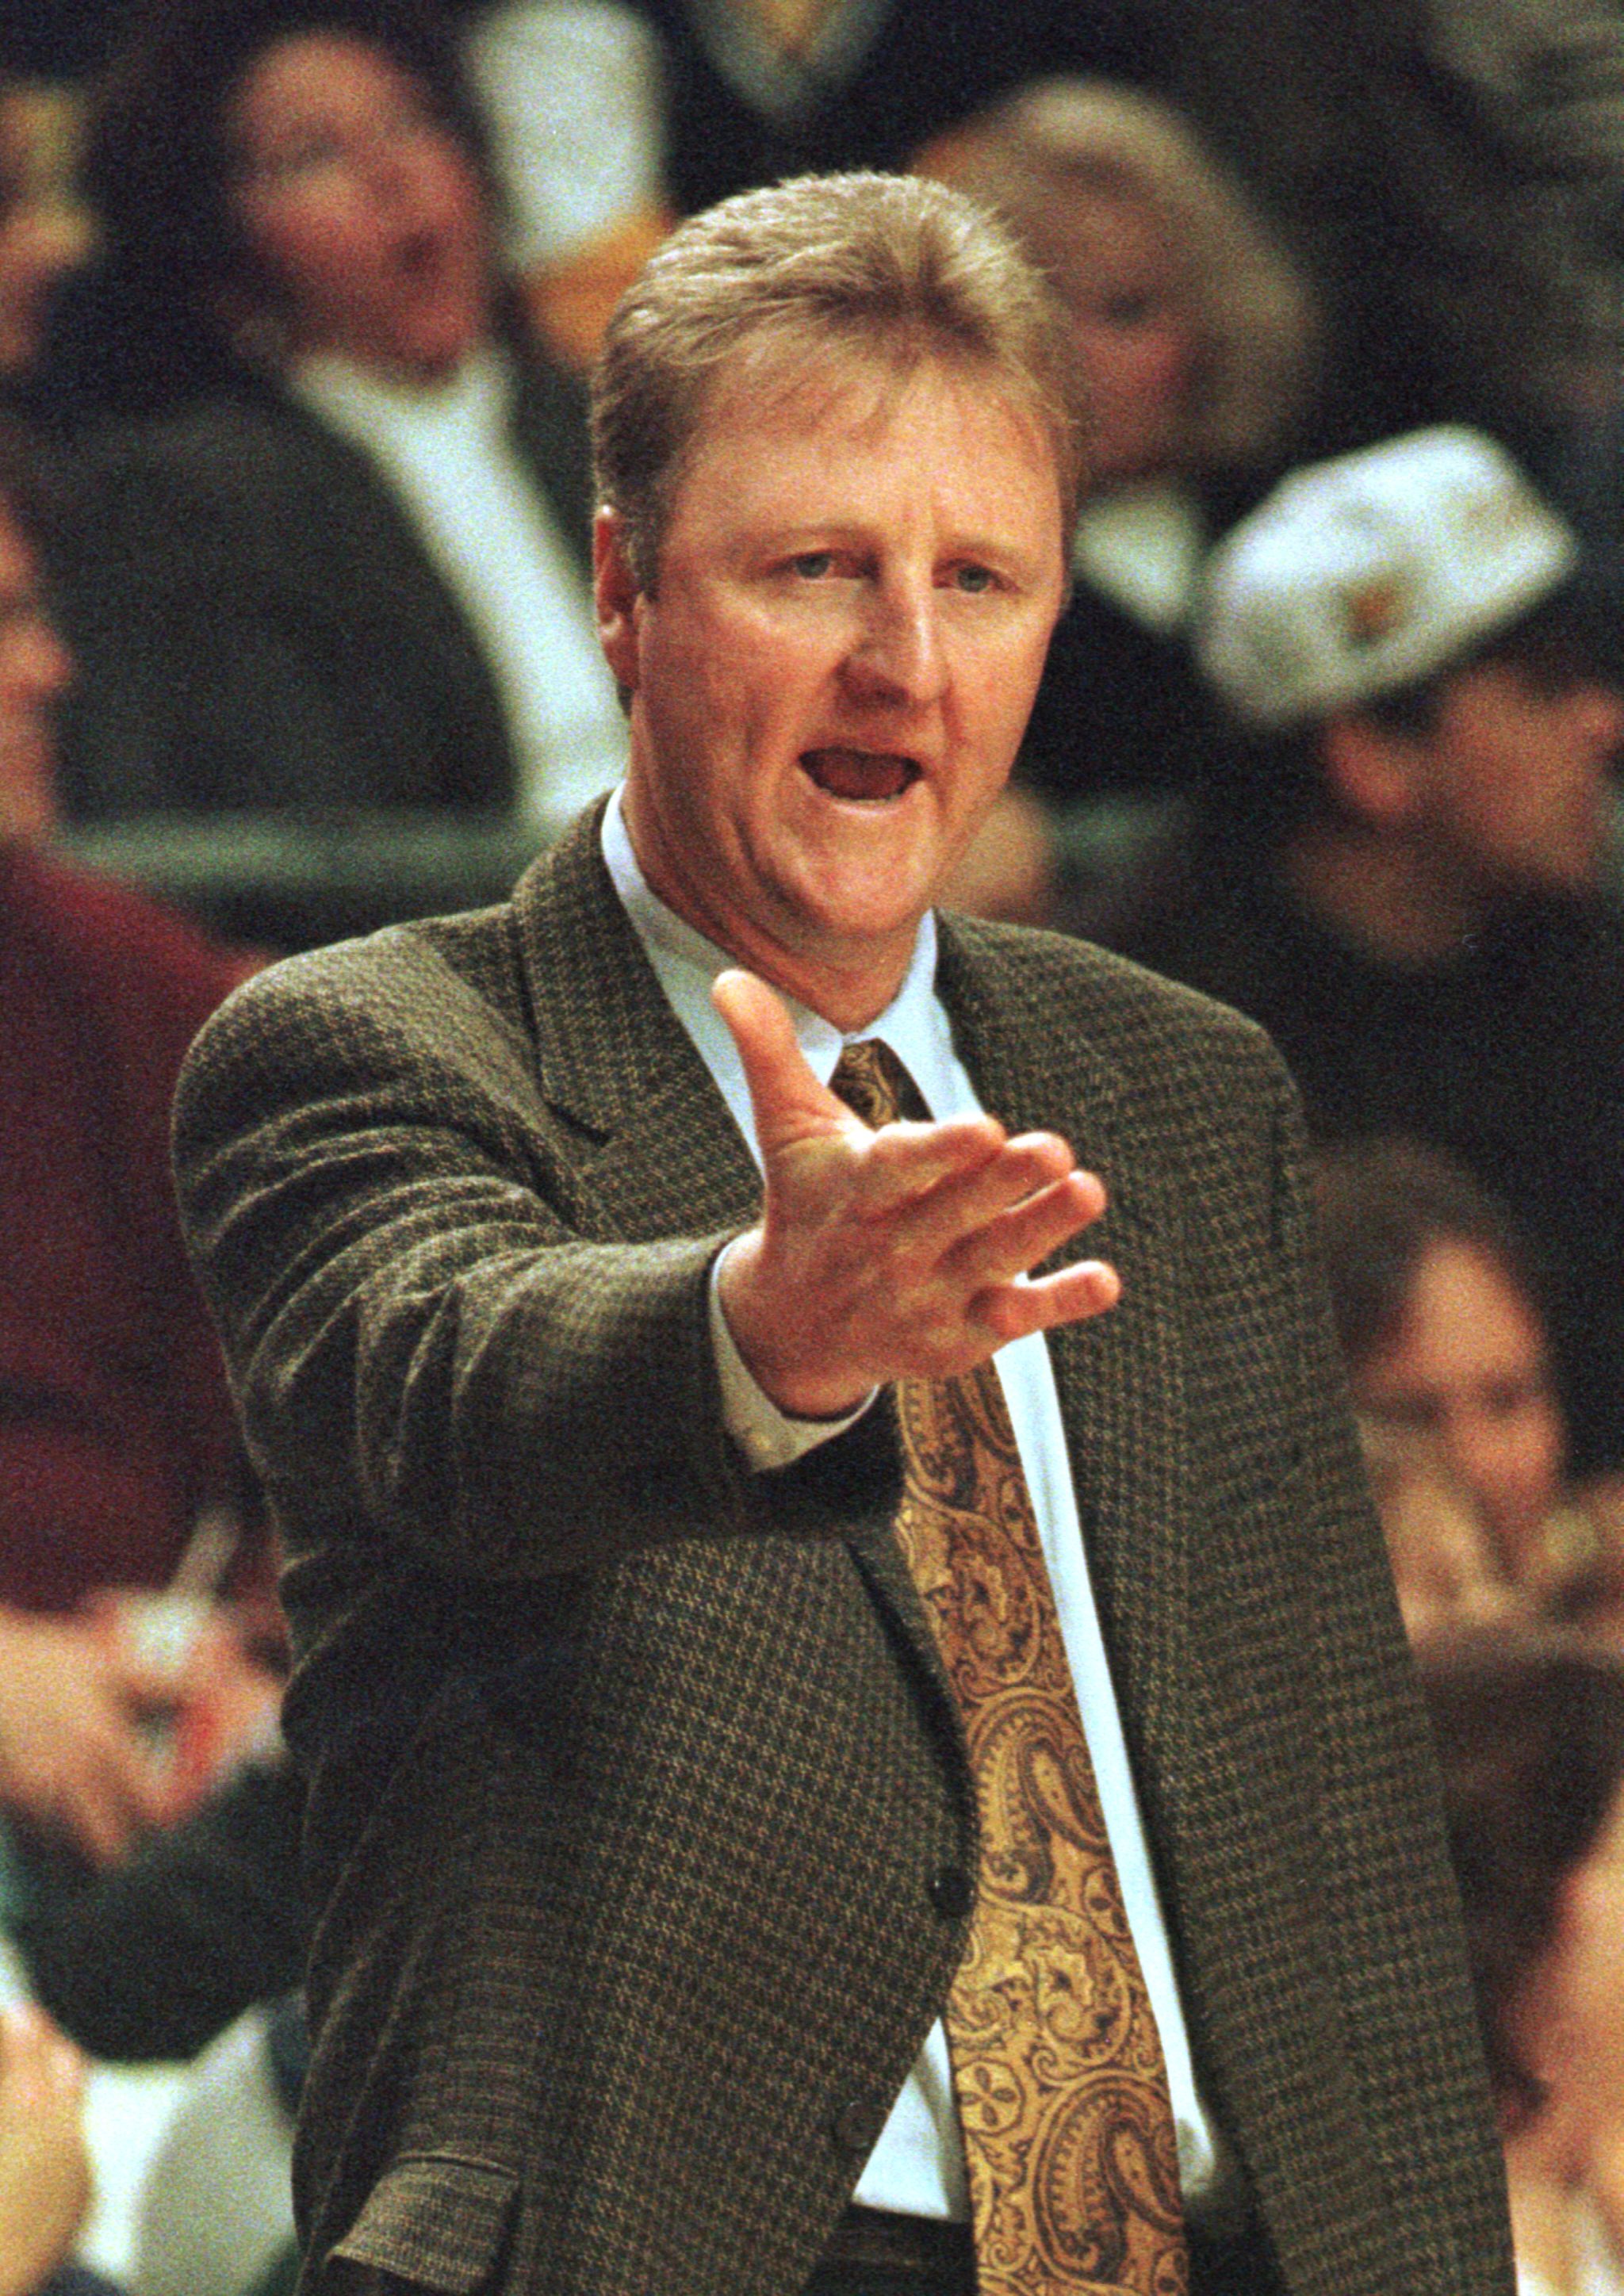 Larry Bird coaches on Indiana Pacers against New Jersey Nets at Market Square Arena in Indianapolis, Indiana, on March 8, 1998. | Source: Getty Images